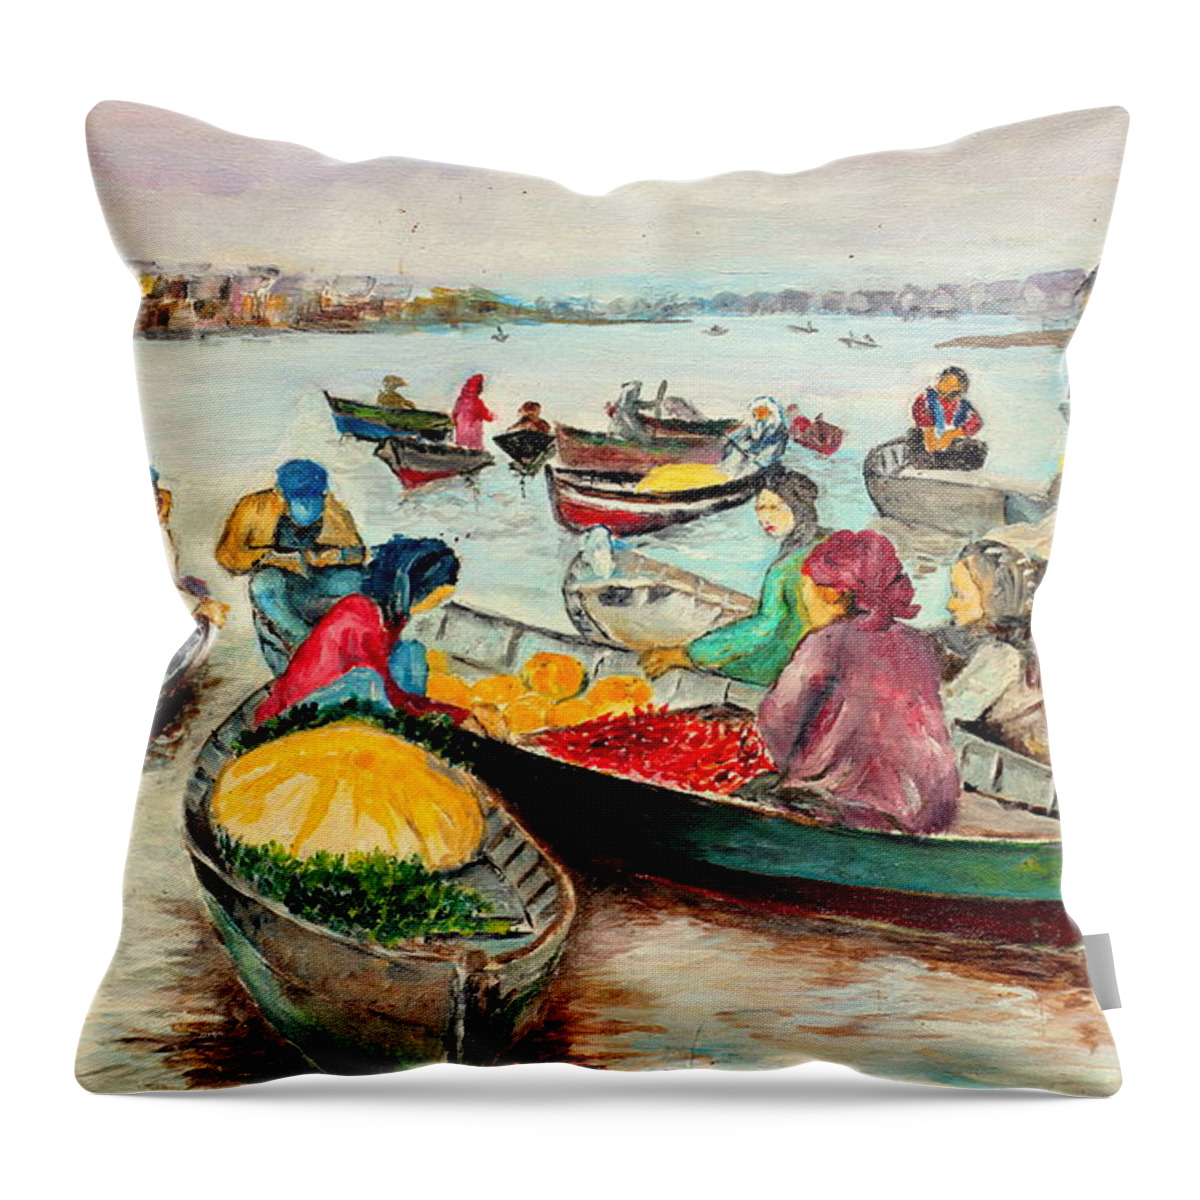 River Throw Pillow featuring the painting Floating Market by Jason Sentuf